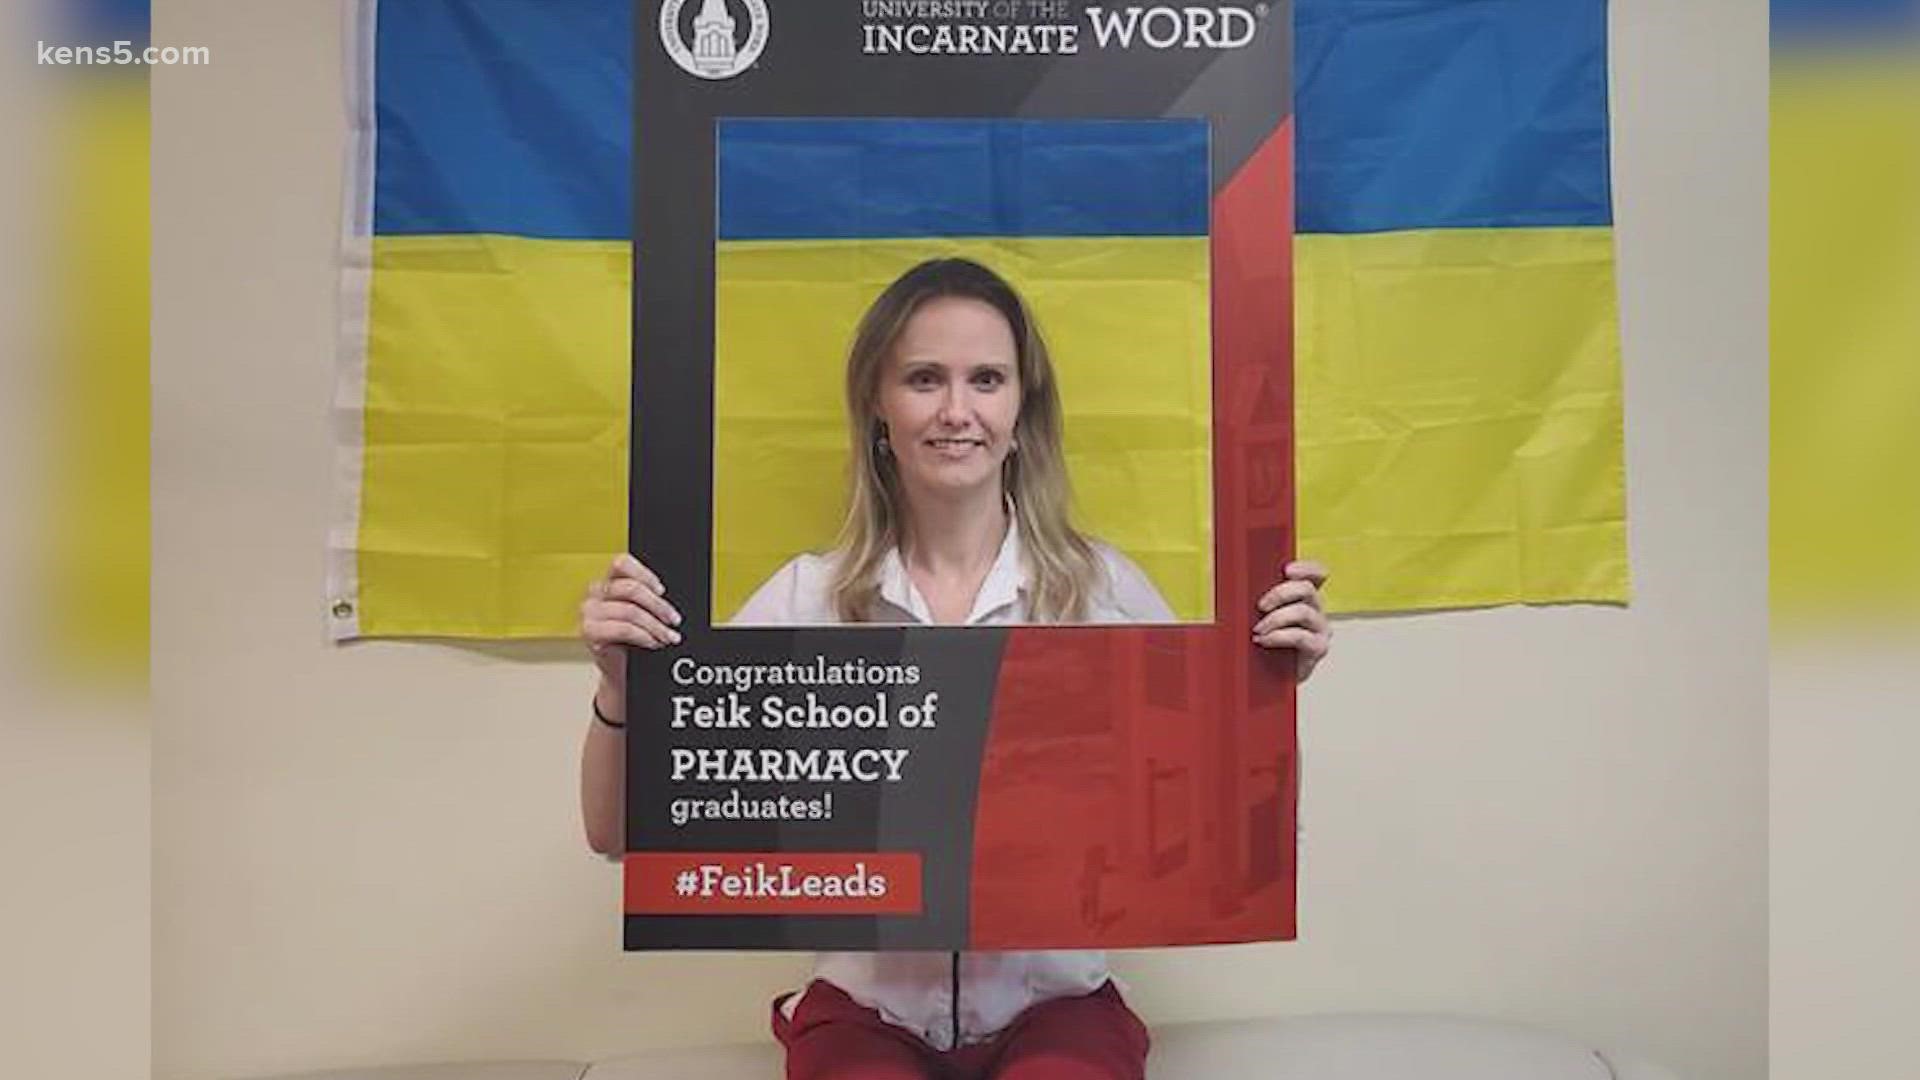 Iryna Aniushkevich opposes the Belarusian government's views on the war. Instead, she stands united with her Ukrainian neighbors.